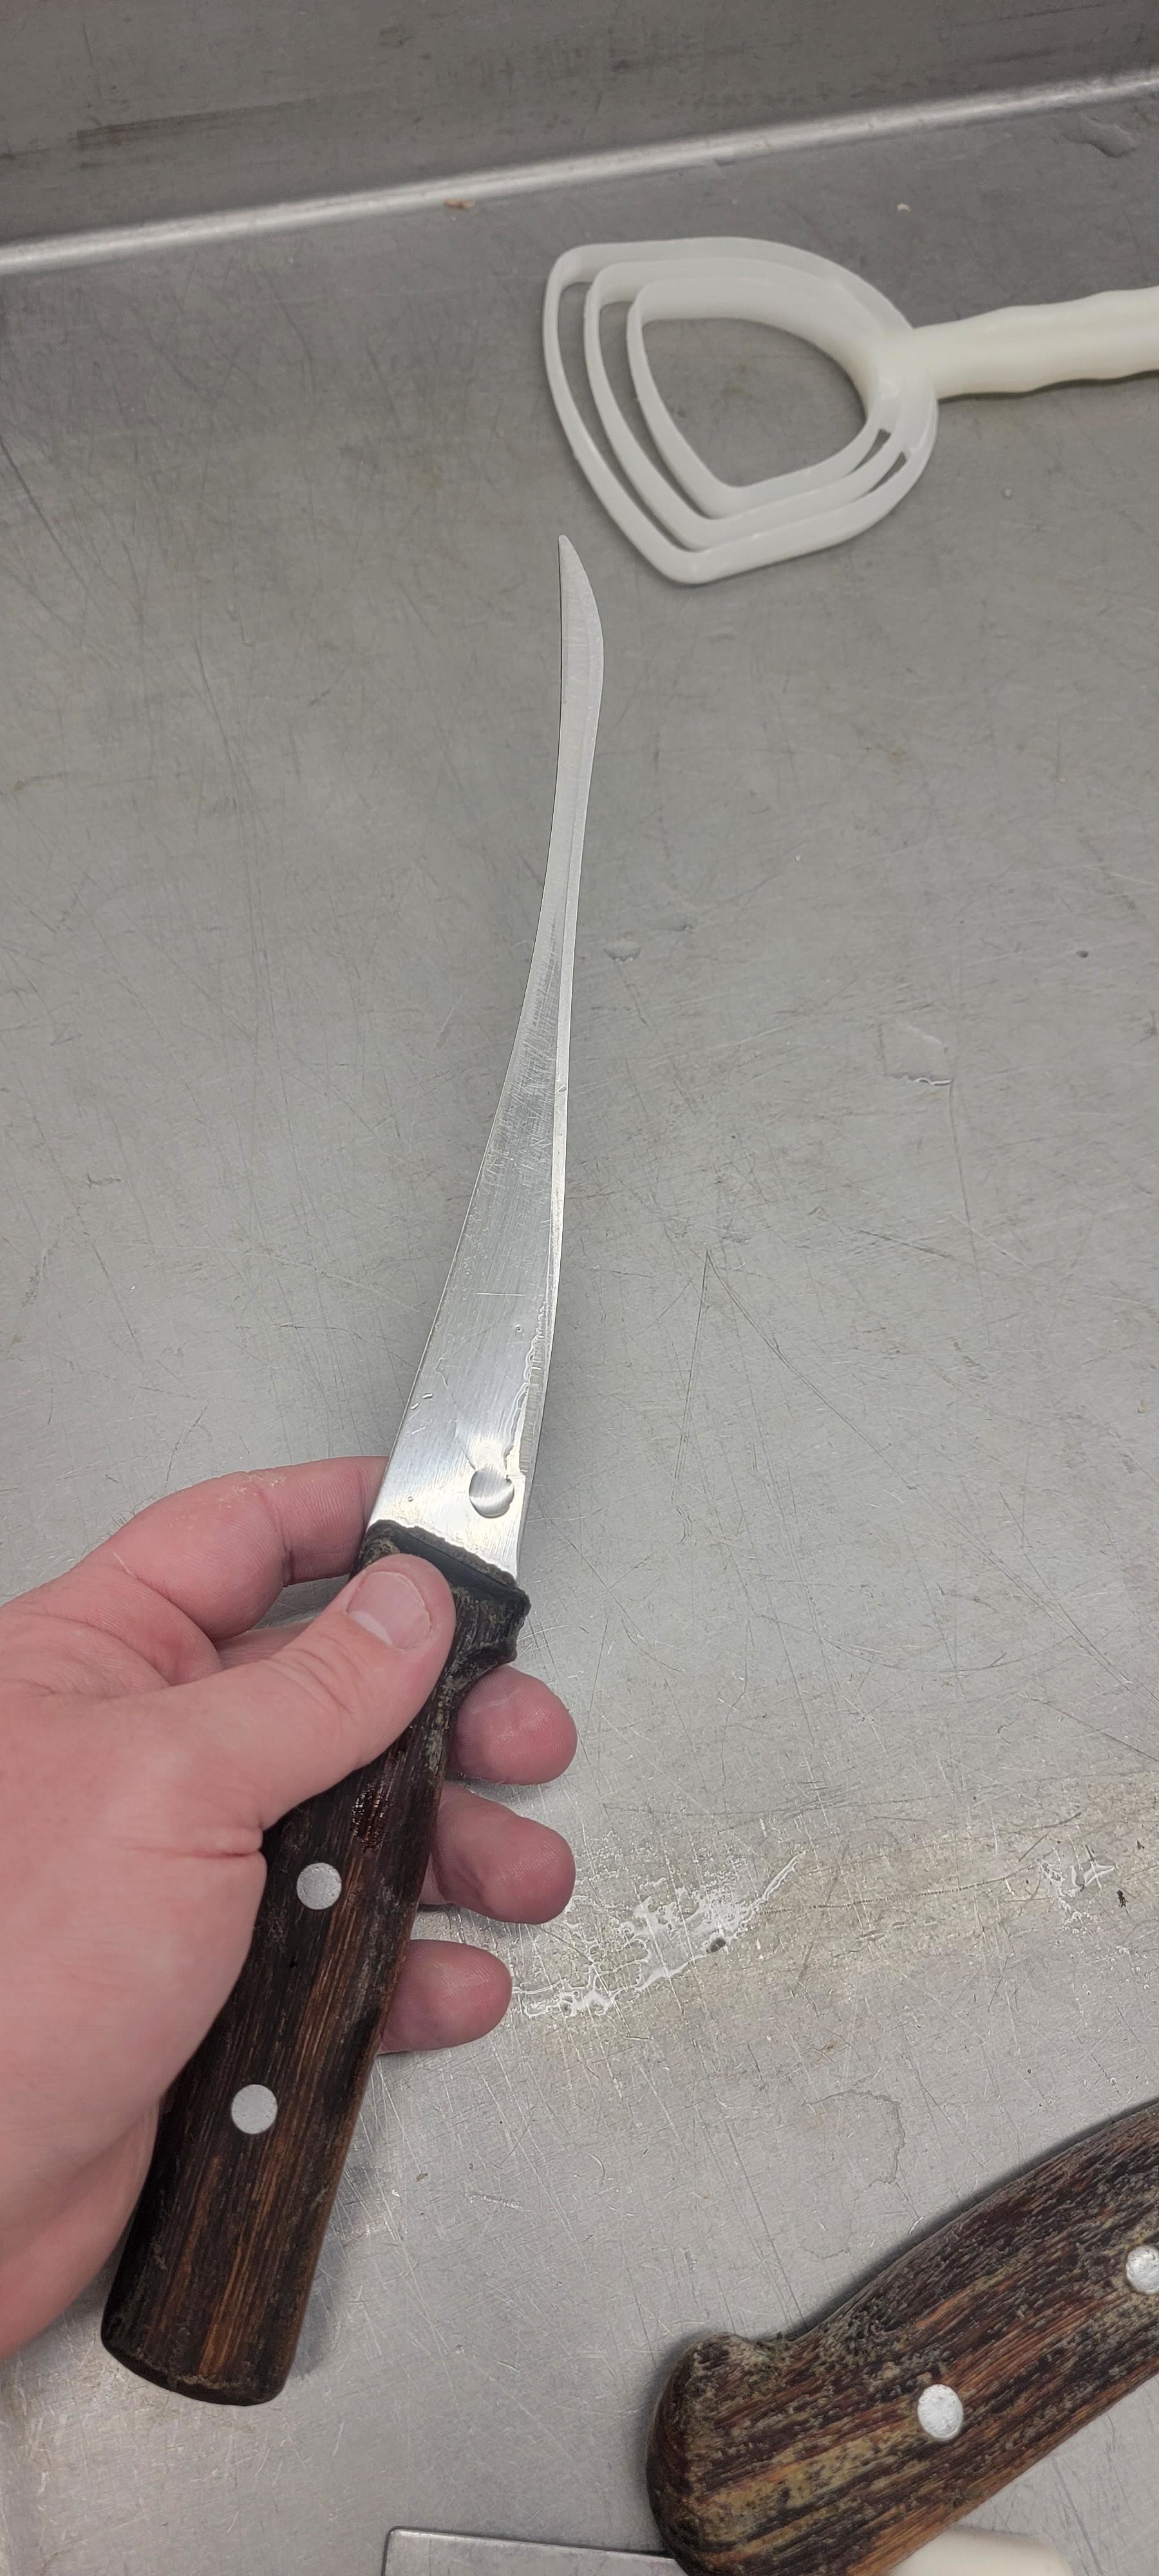 A very thin, elongated, tapered knife